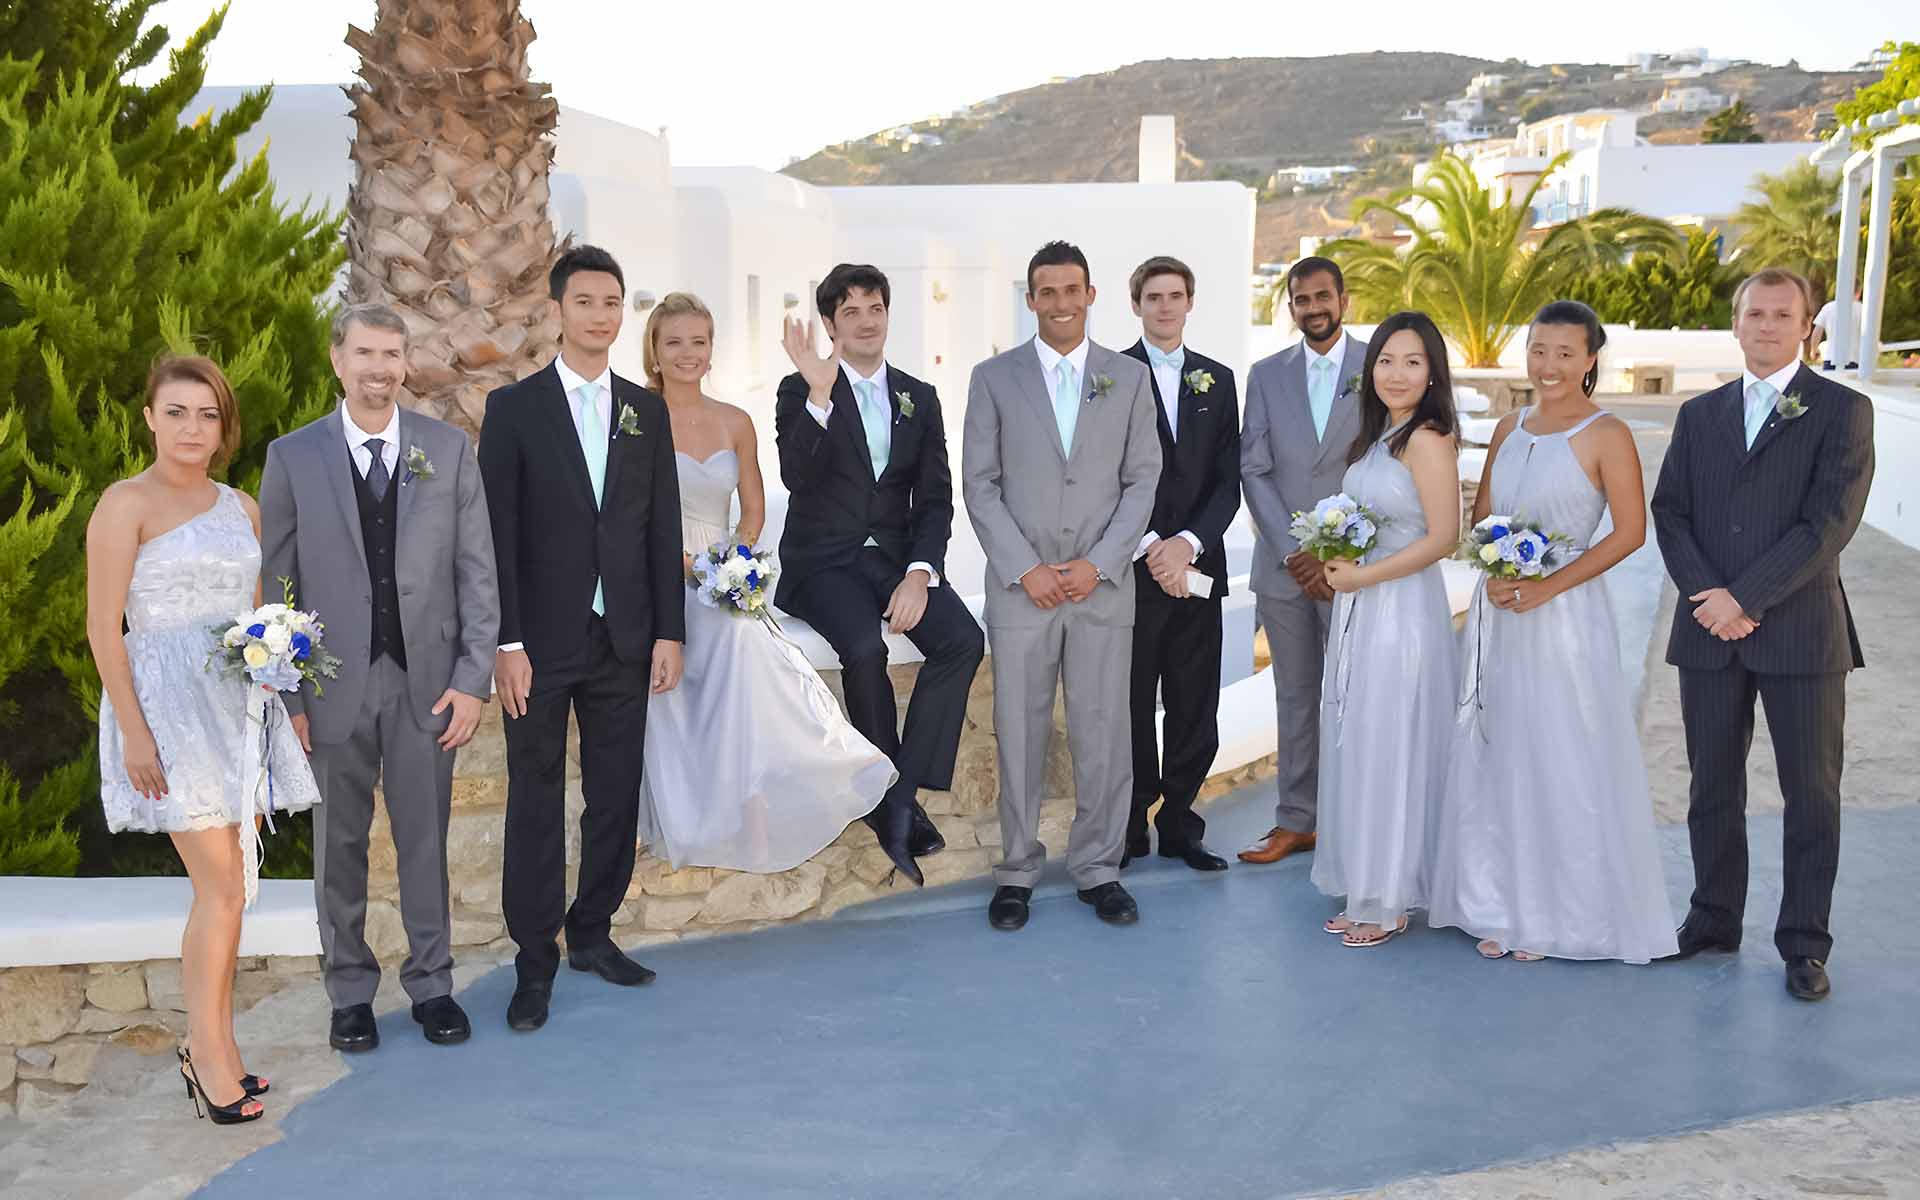 Bridesmaids-and-bridegrooms-are-waiting-for-the-bride-in-Saint-John-Hotel-Mykonos-event-planner-Diamond-events.